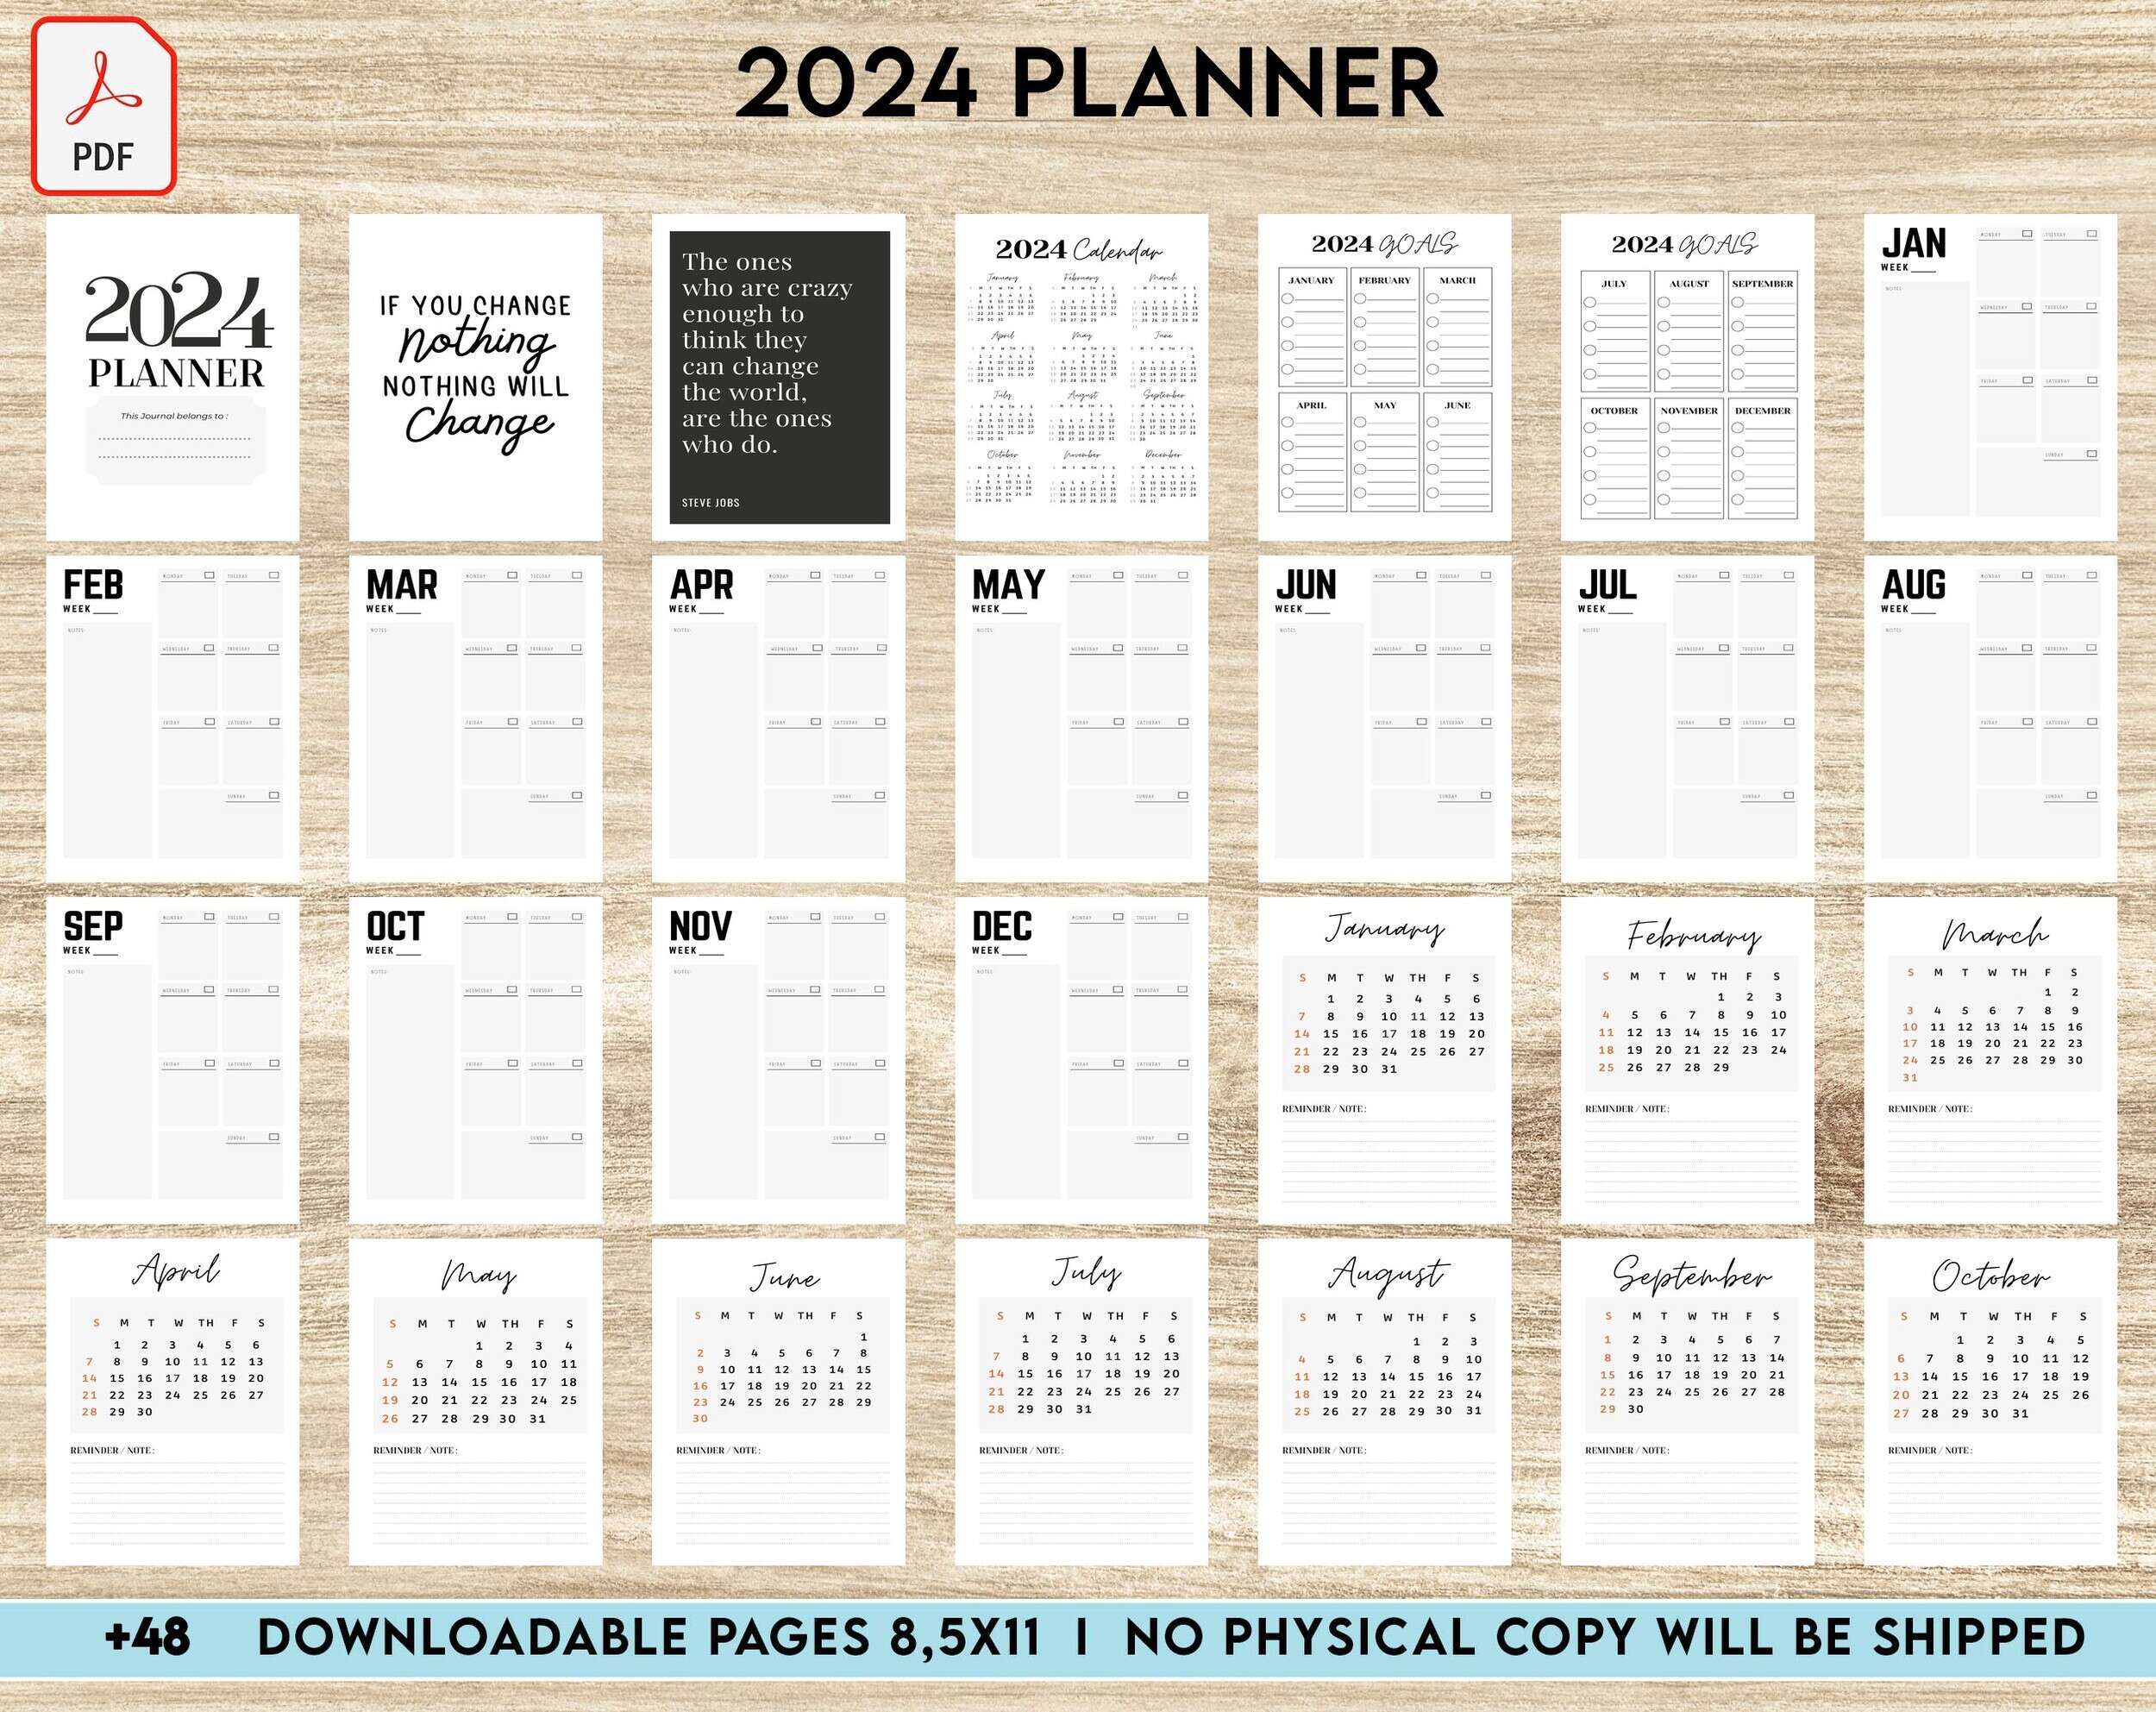 2024 Calendar With Notes to Print, 2024 Agenda, 2024 Planner, 2024